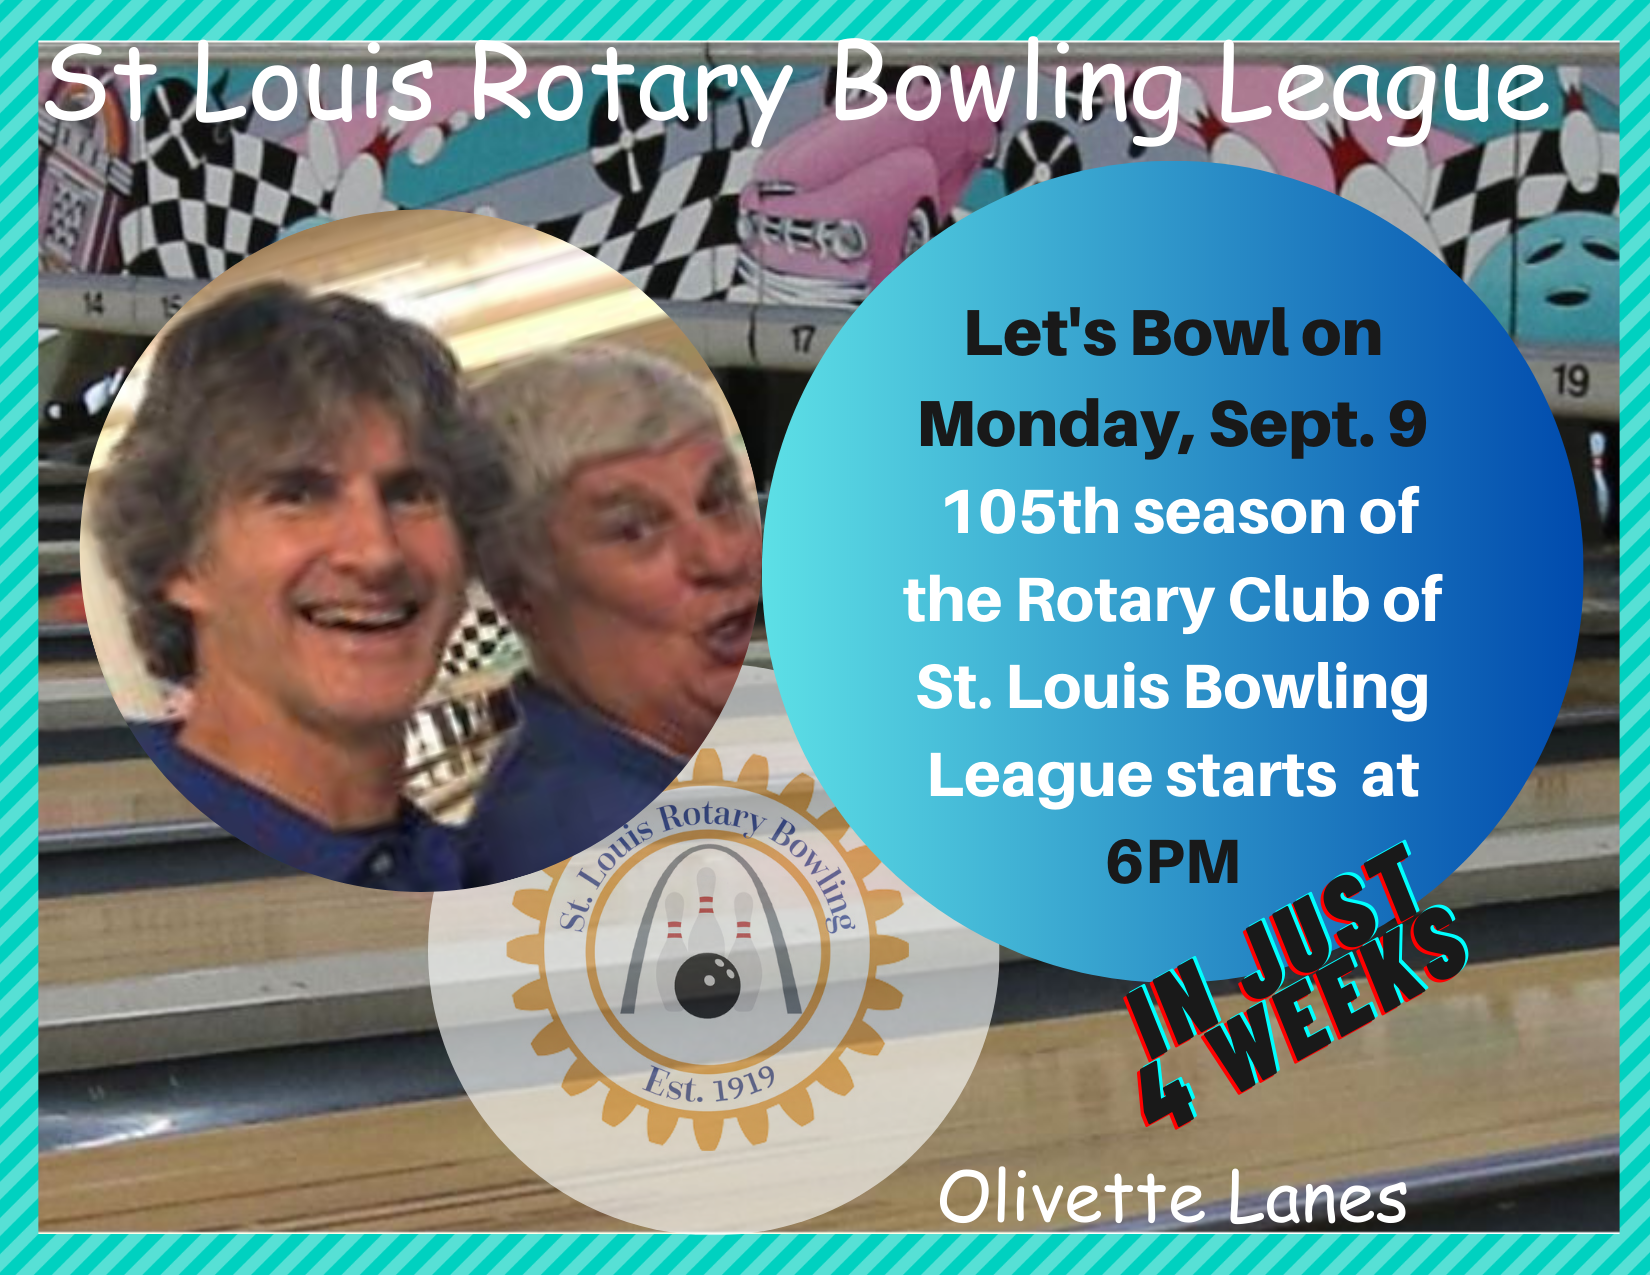 Let's Bowl! 105th Season of St. Louis Rotary Bowling league